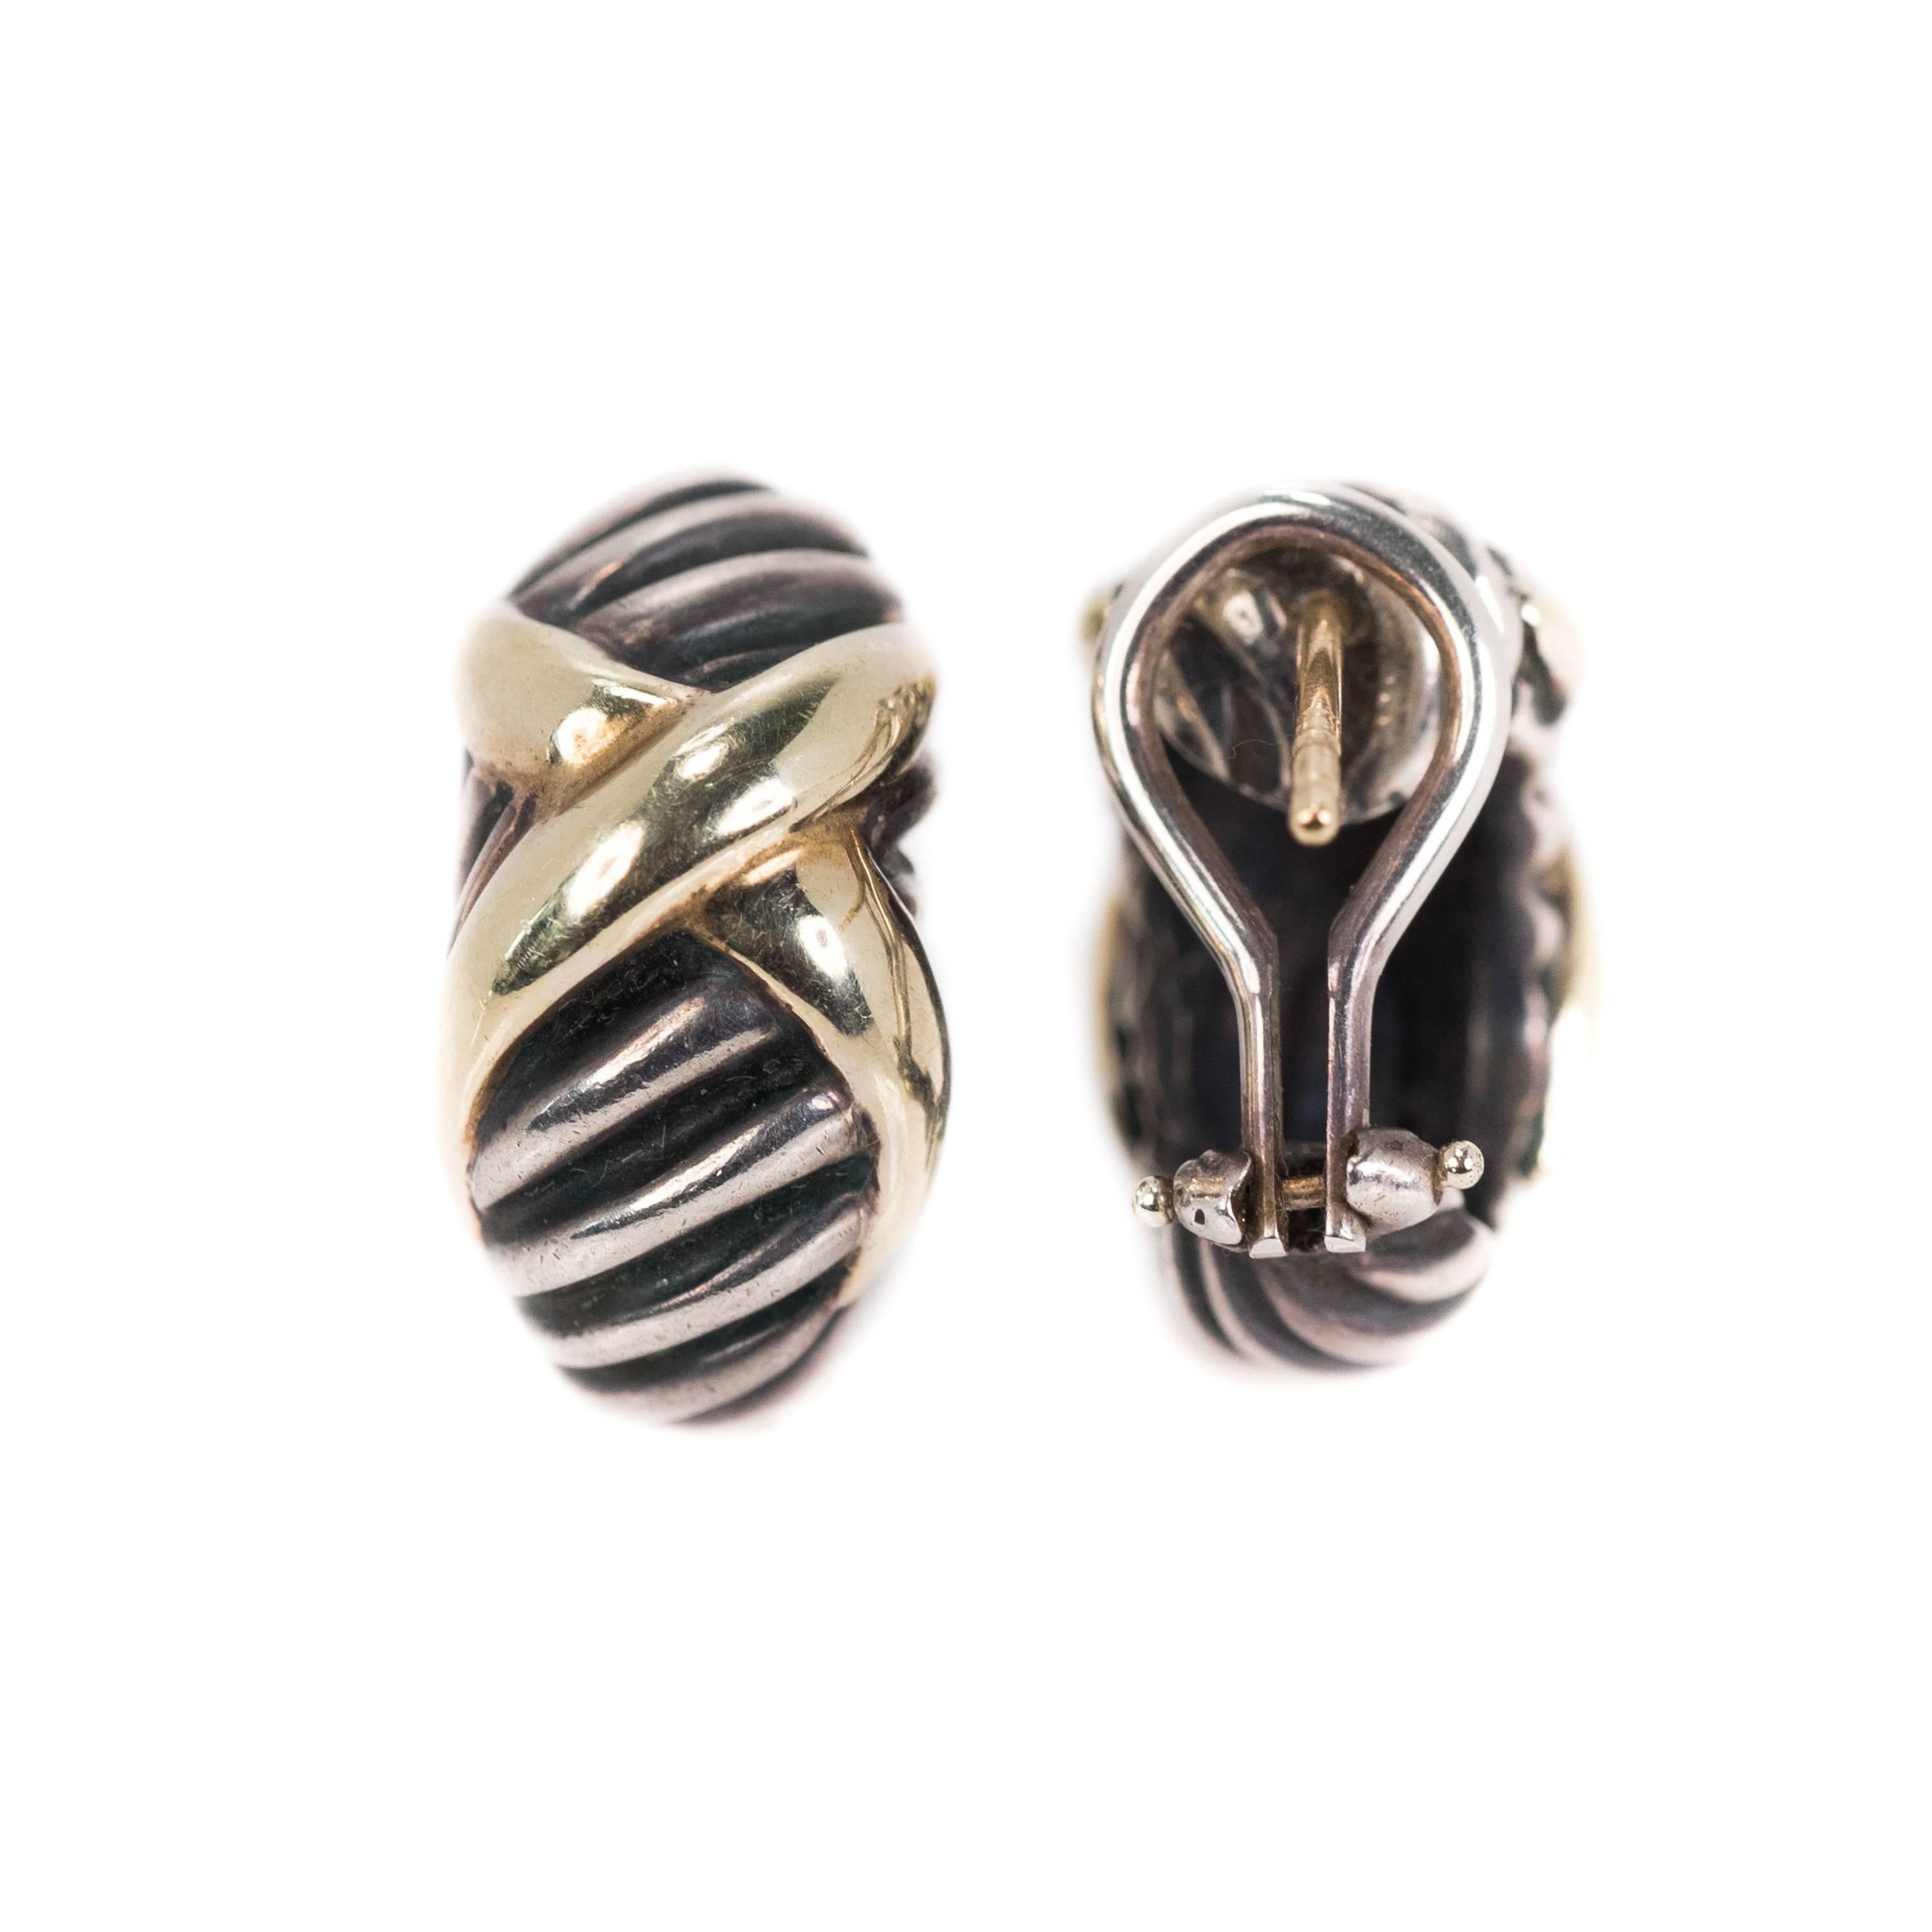 David Yurman X Cable Earrings - Sterling Silver, 14k Yellow Gold

Features Sterling Silver single Rope Cable Design with a 14k Yellow Gold X accent. 
These huggie earrings have 14k Yellow Gold posts. The Sterling Silver Omega backs provide extra